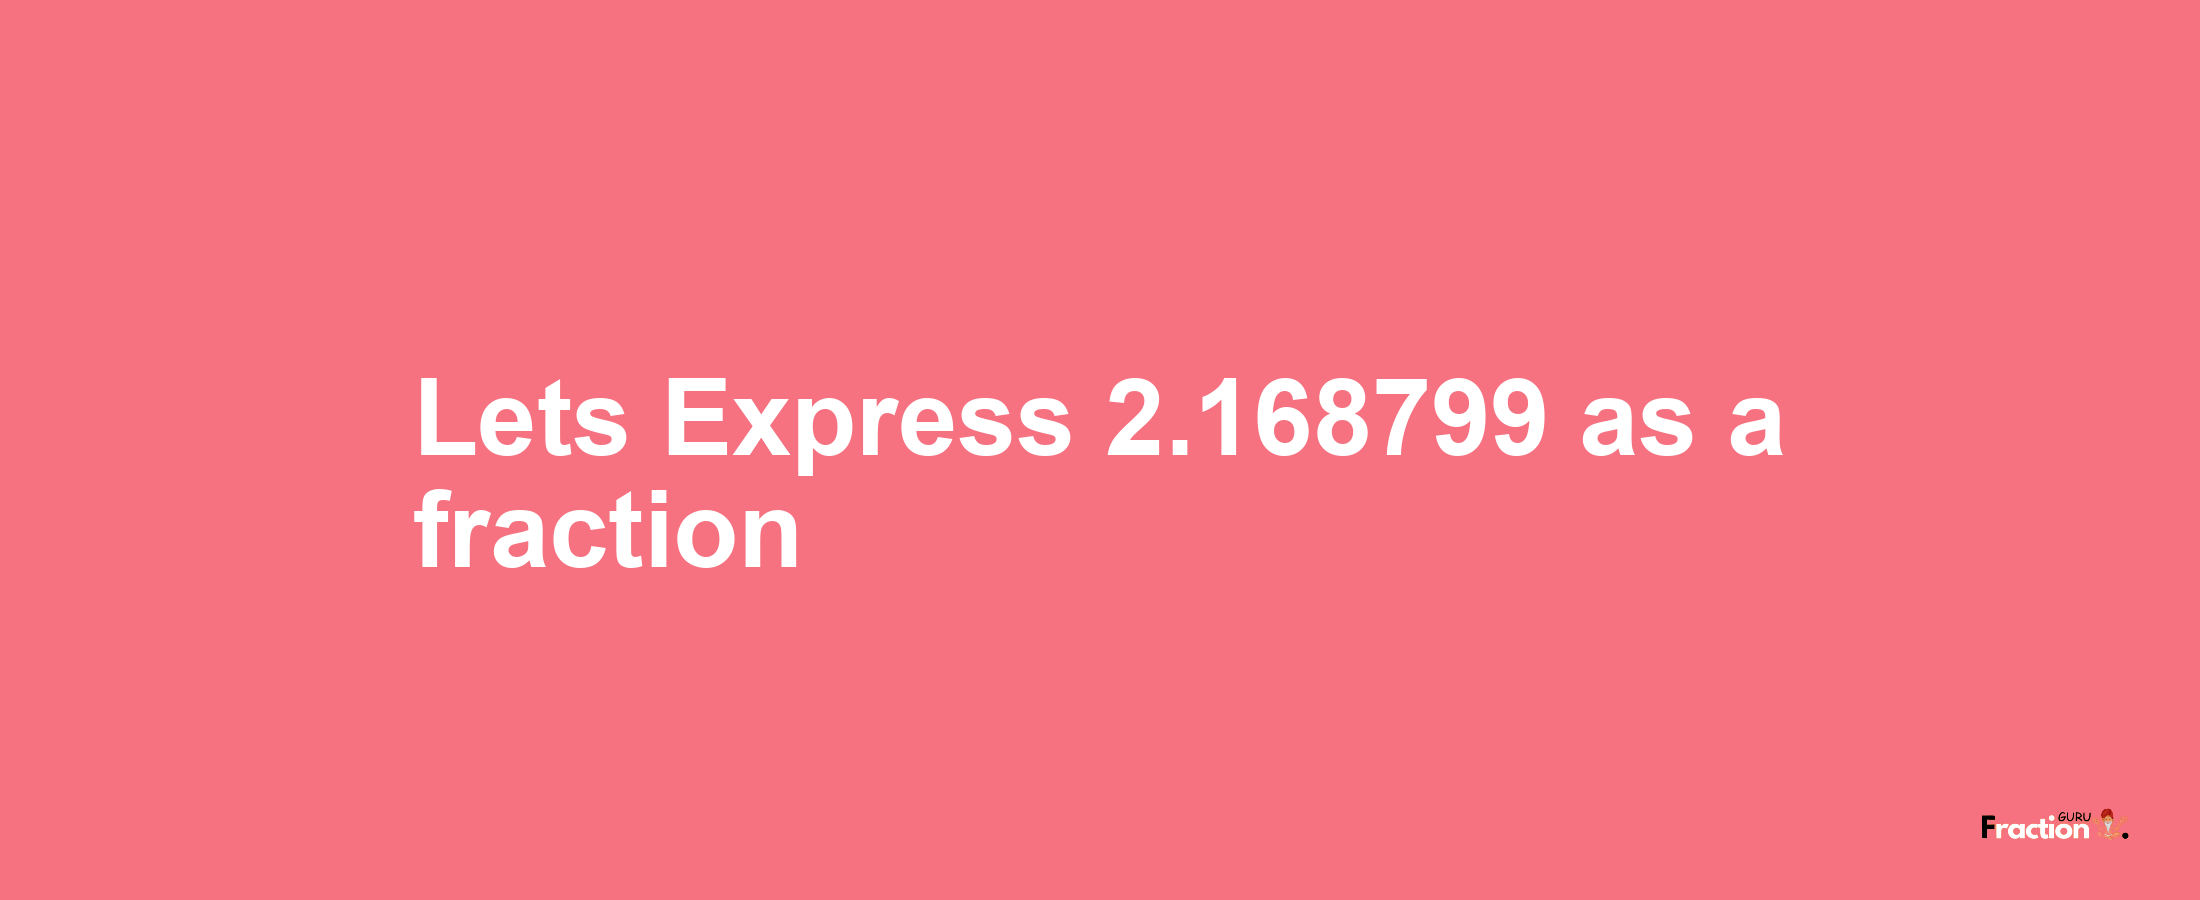 Lets Express 2.168799 as afraction